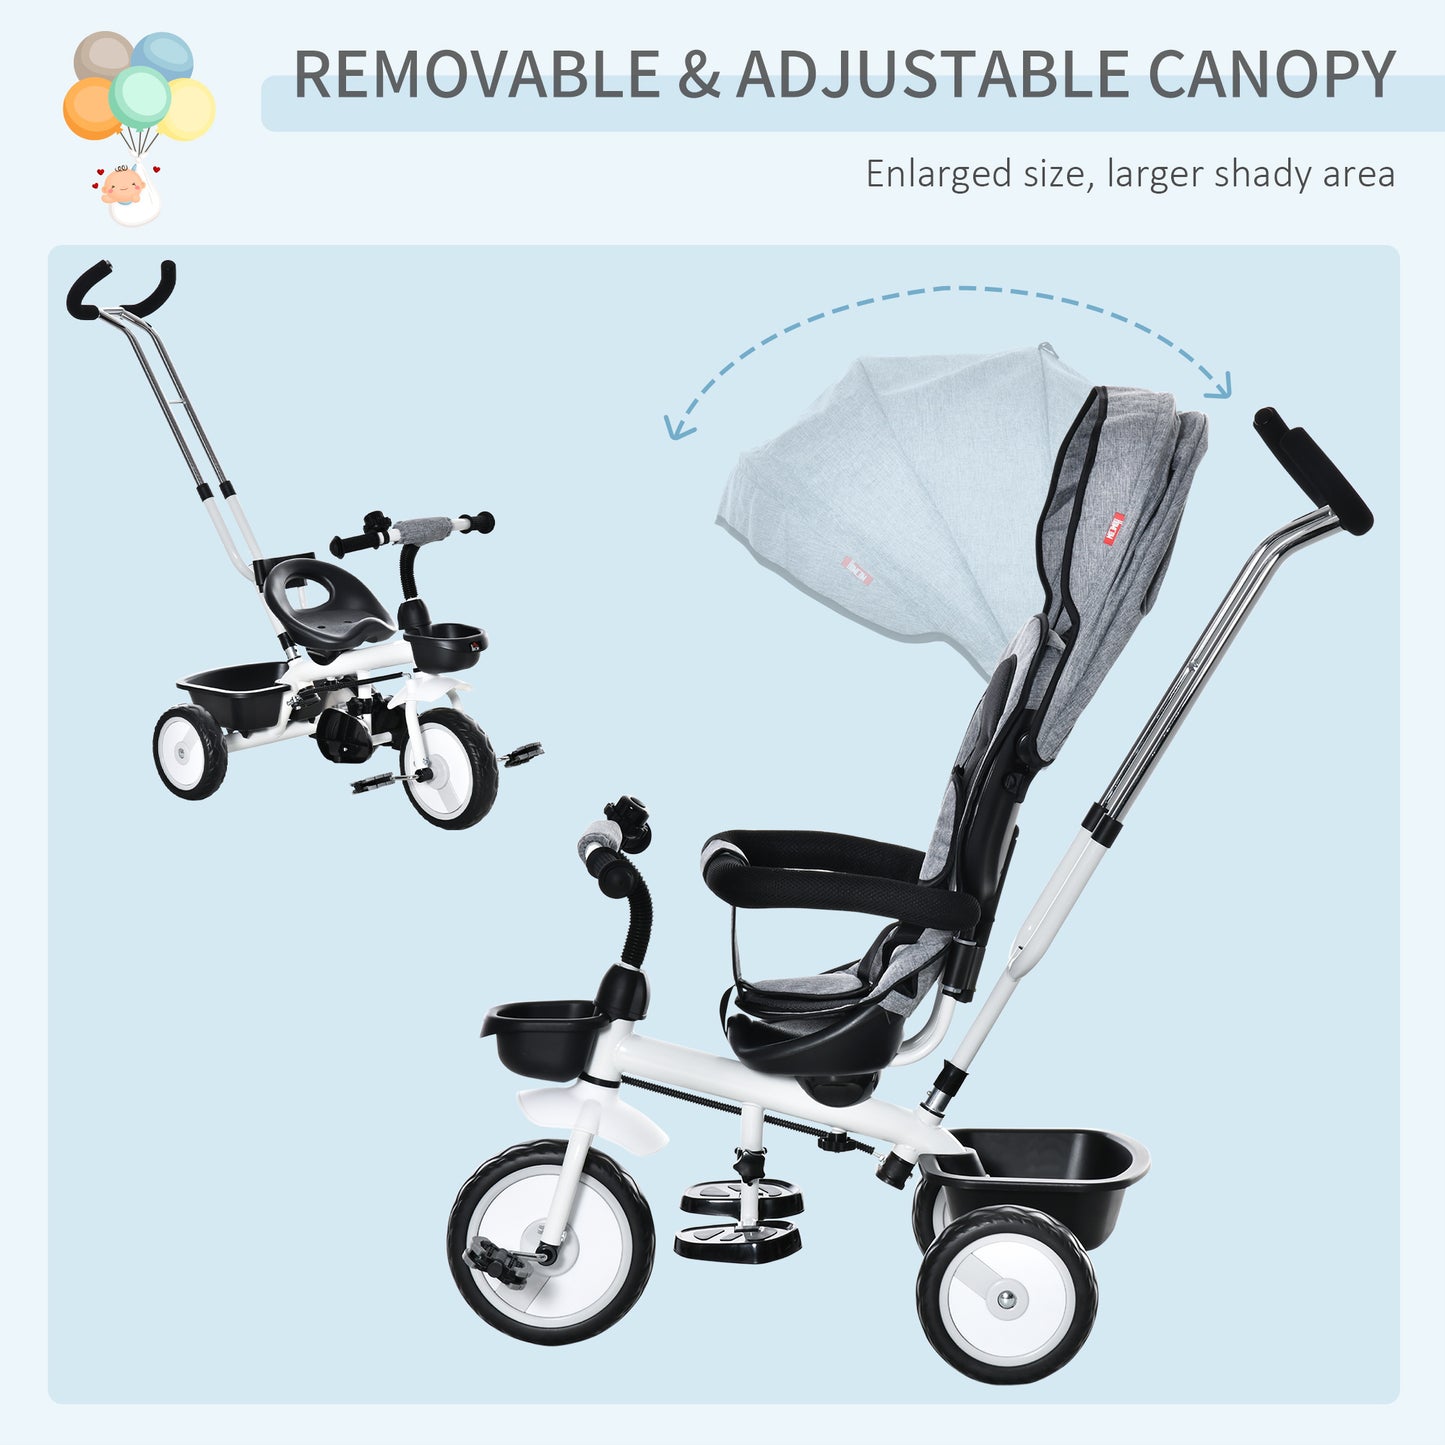 HOMCOM 6 in 1 Baby Tricycle Toddler Stroller Pedal Tricycle w/ Reversible Seat Adjustable Removable Handle Canopy Handrail Belt for 1-5 Years Old Grey